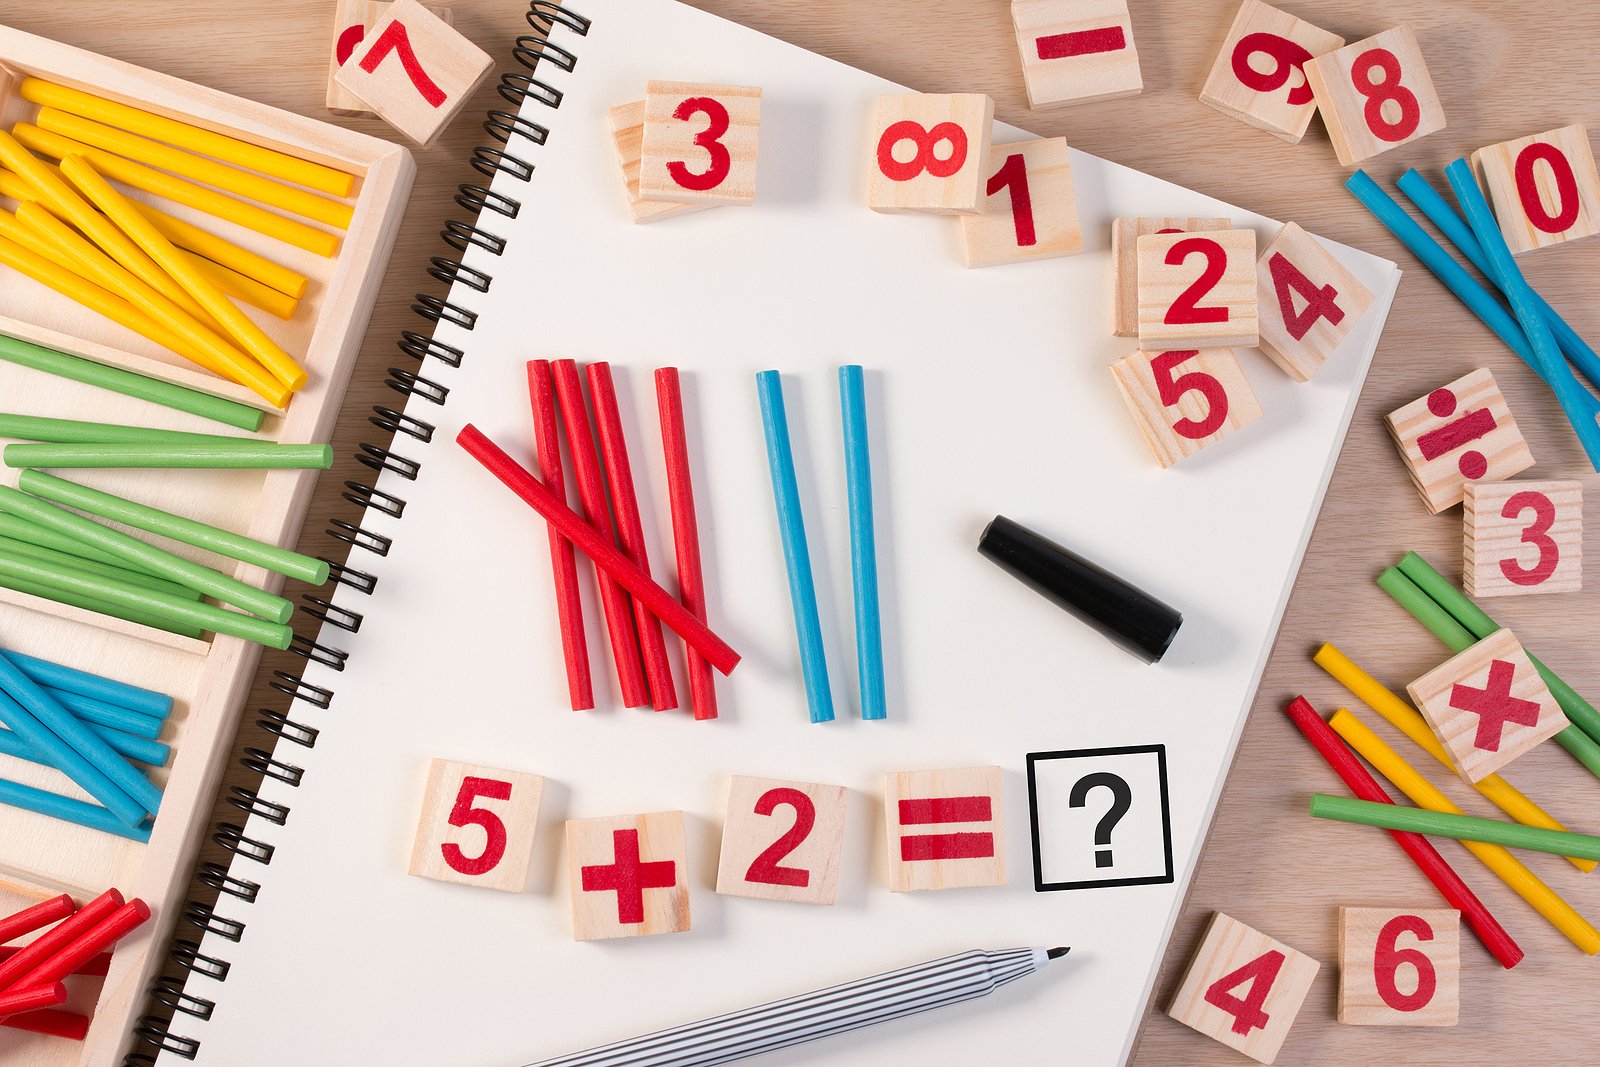 How to Use CRA to Teach Math and Increase Student Learning